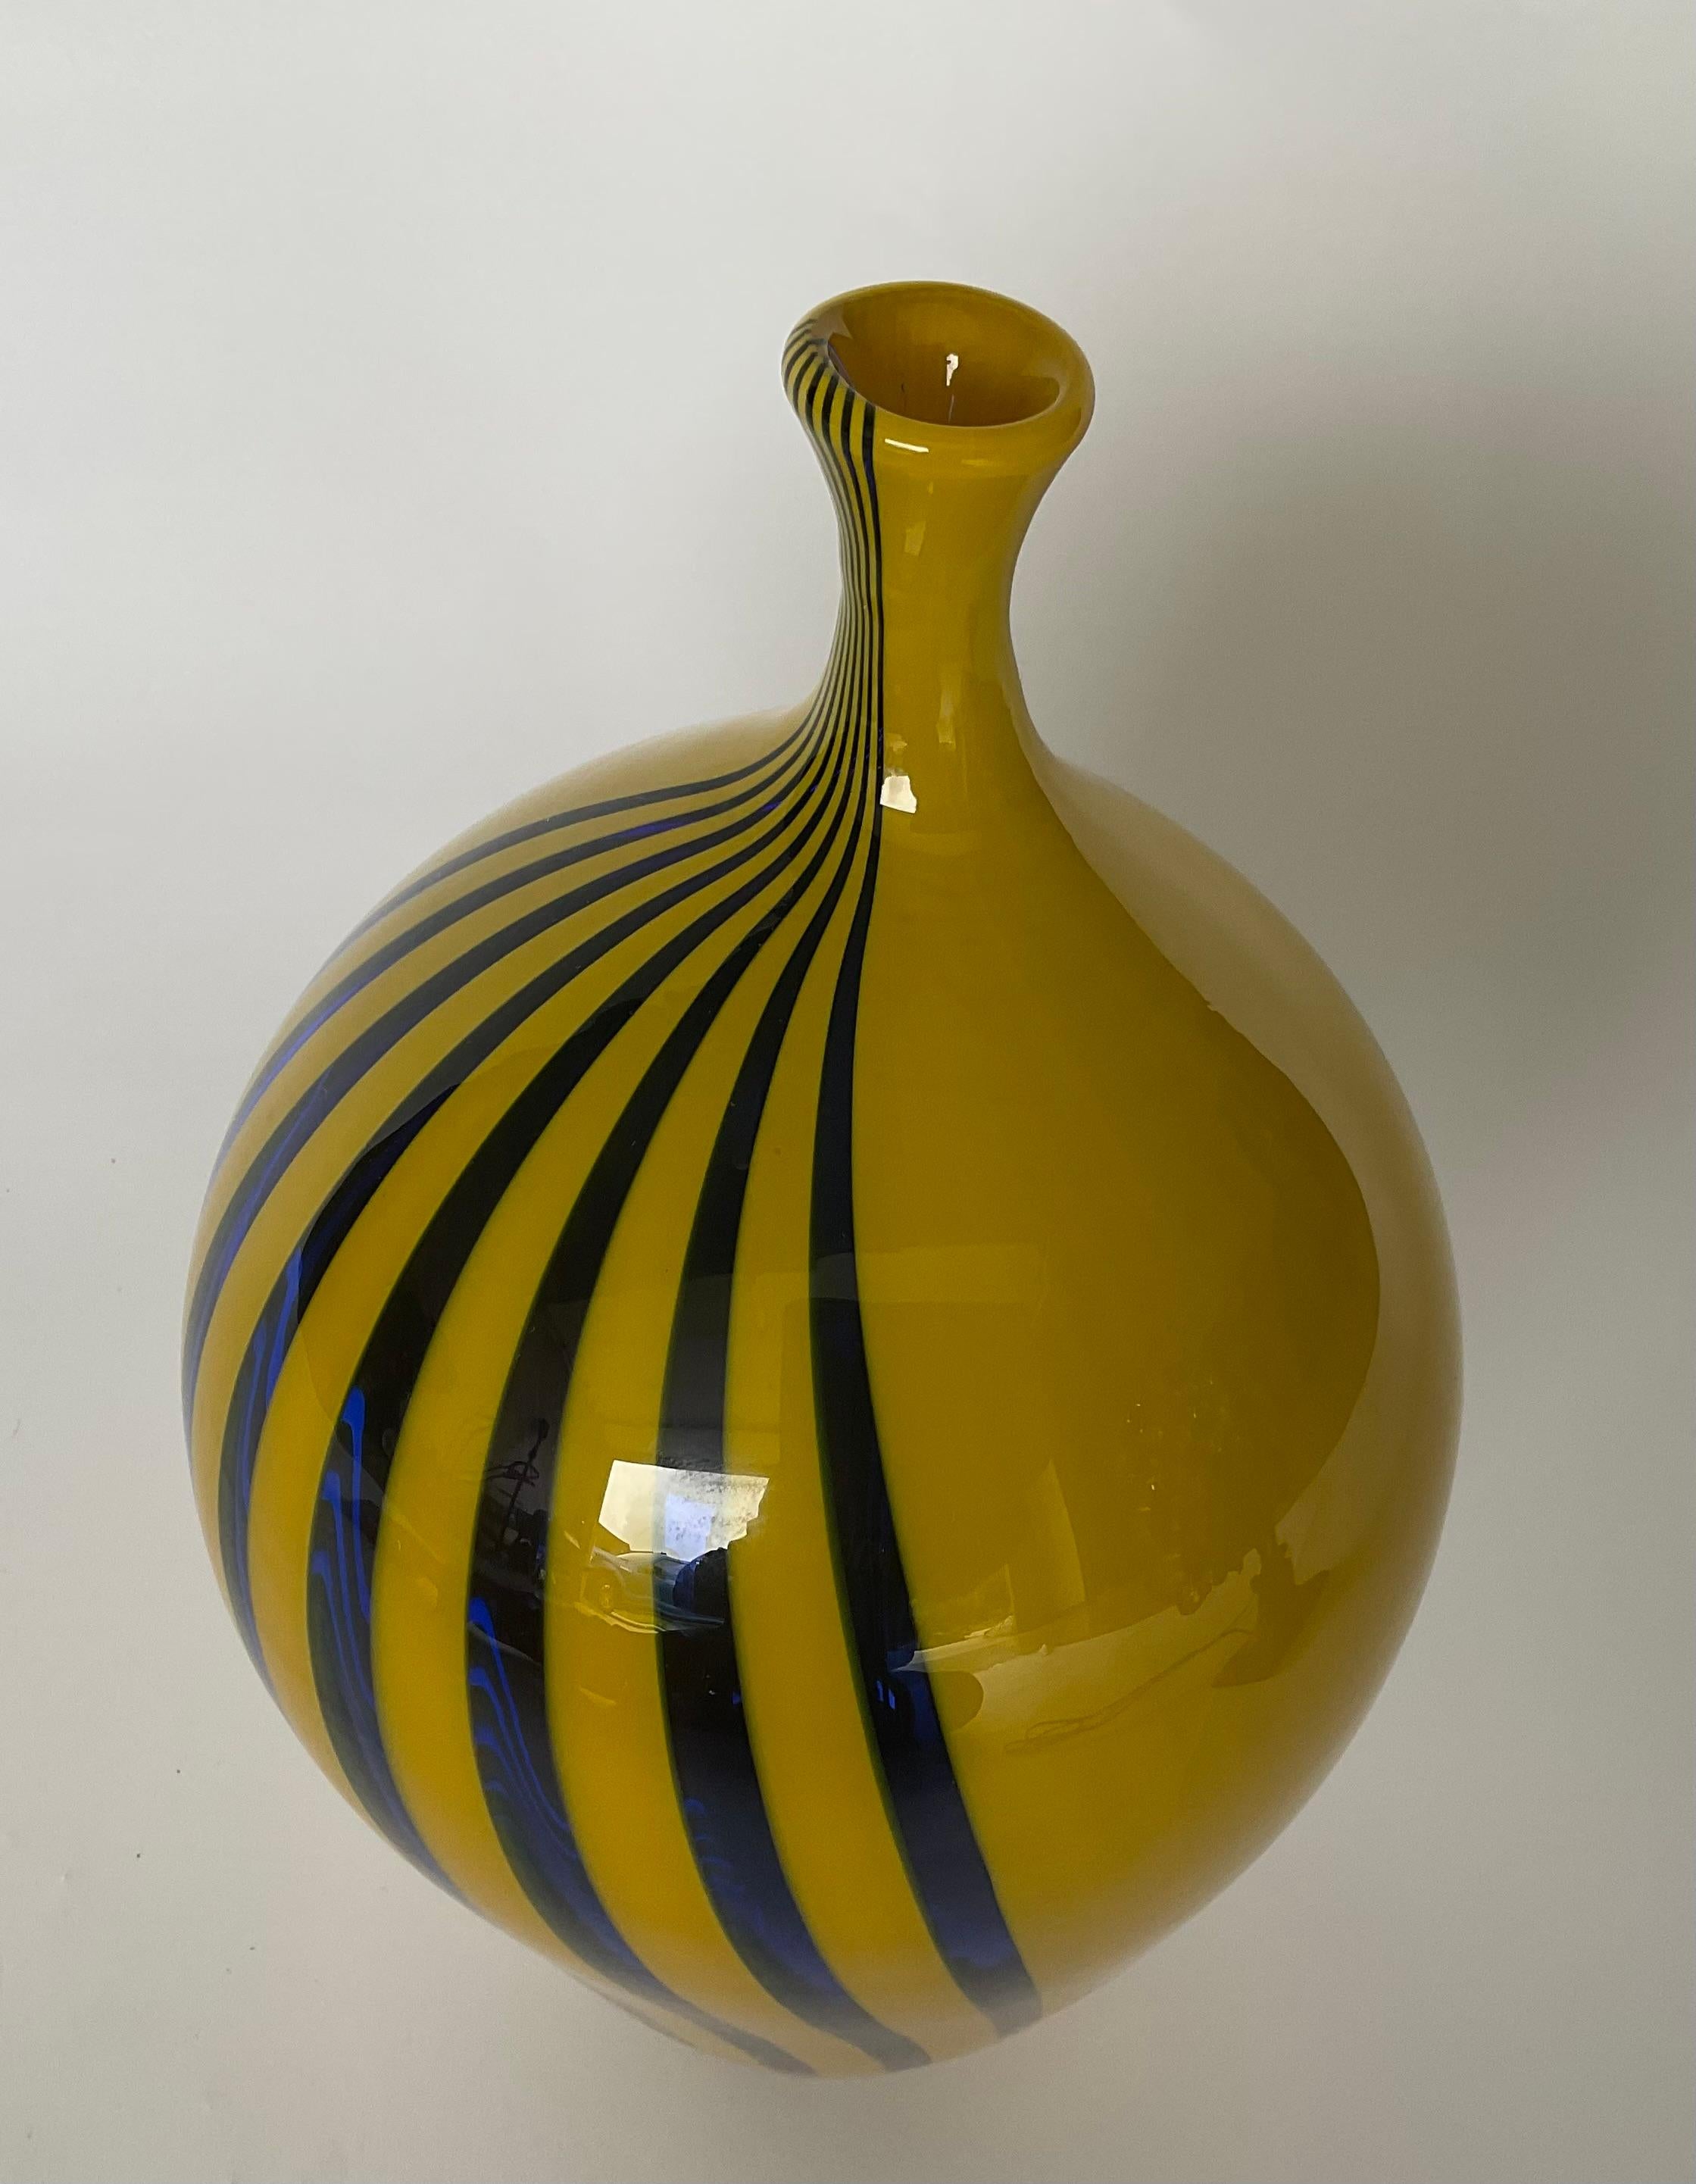 Contemporary Afro Celotto Artist Signed Studio Murano Art Glass Vase in blue and yellow  For Sale